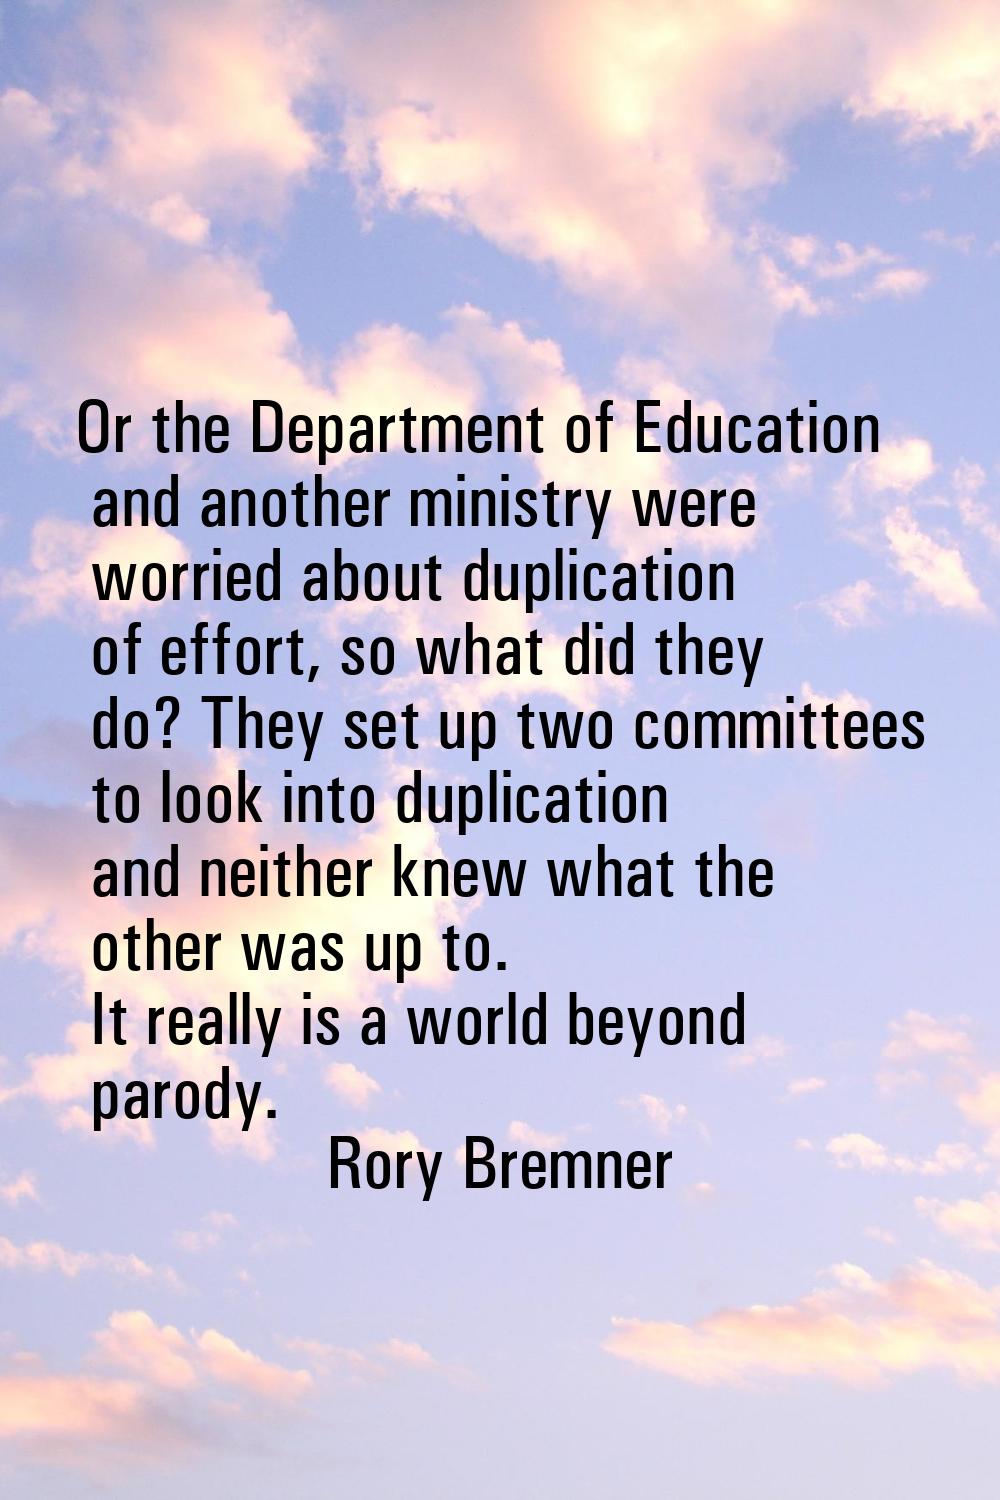 Or the Department of Education and another ministry were worried about duplication of effort, so wh